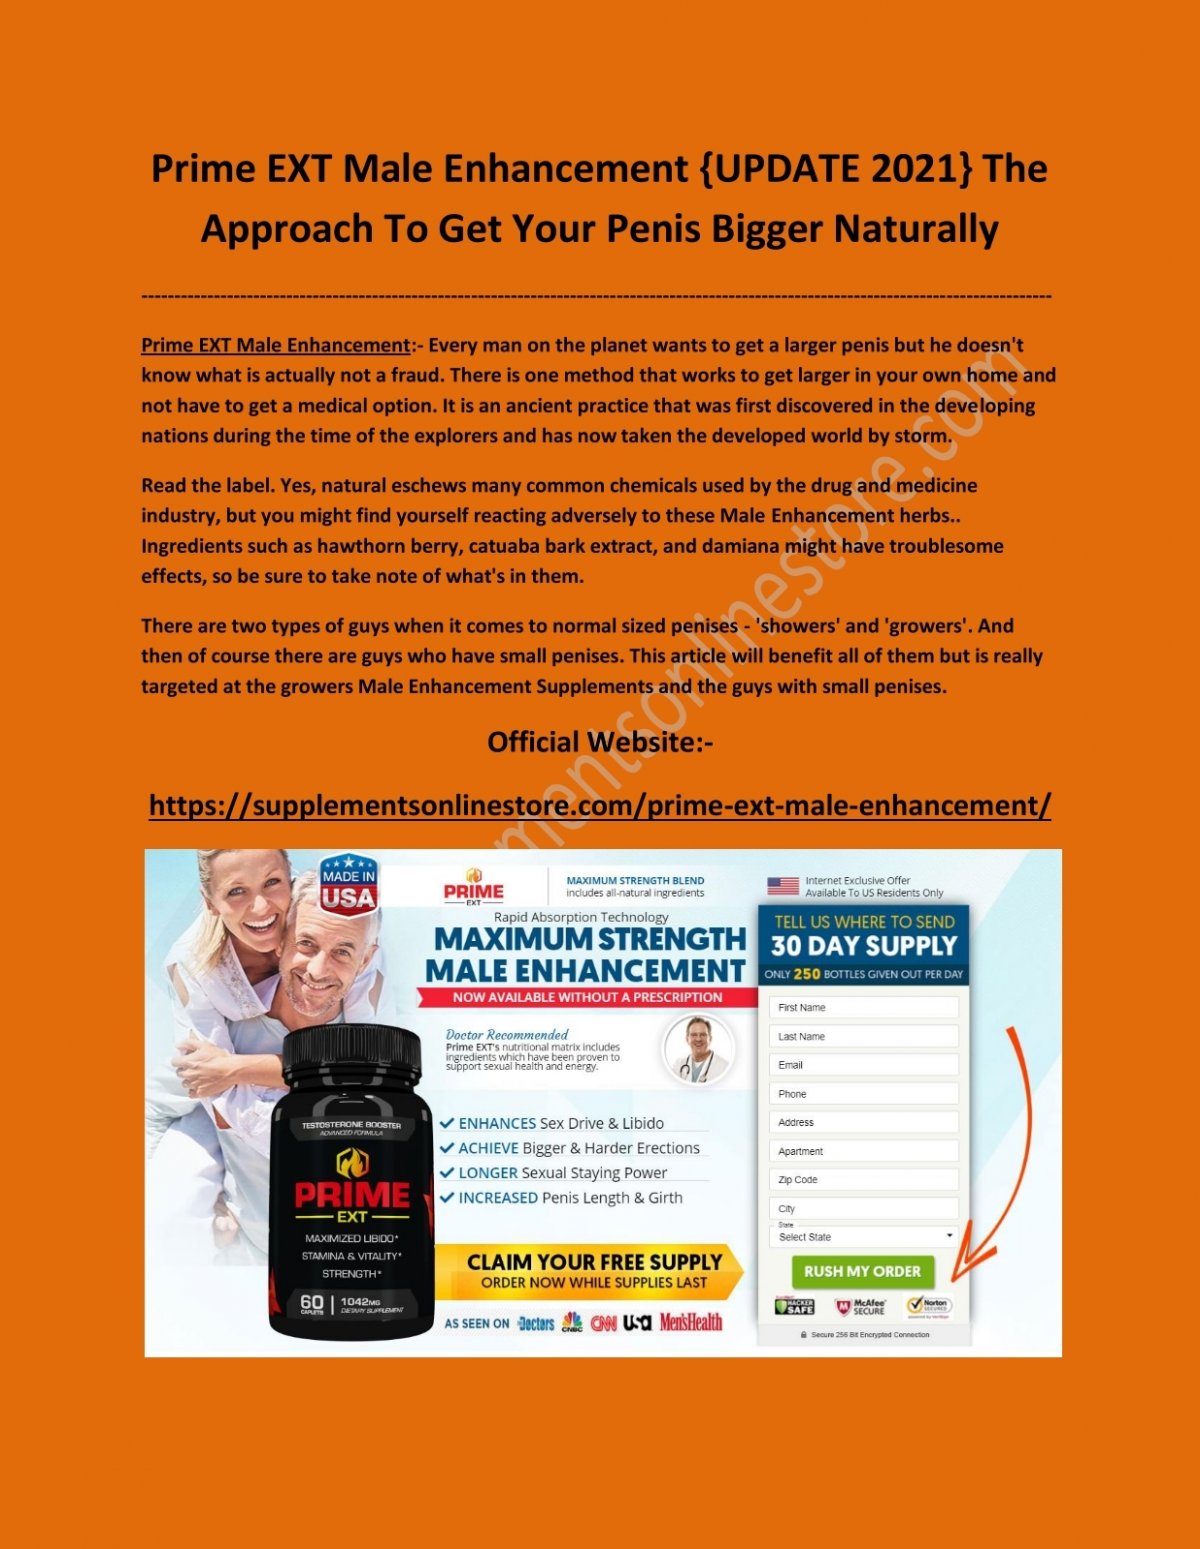 How To Enlarge Your Peni Naturally For Free